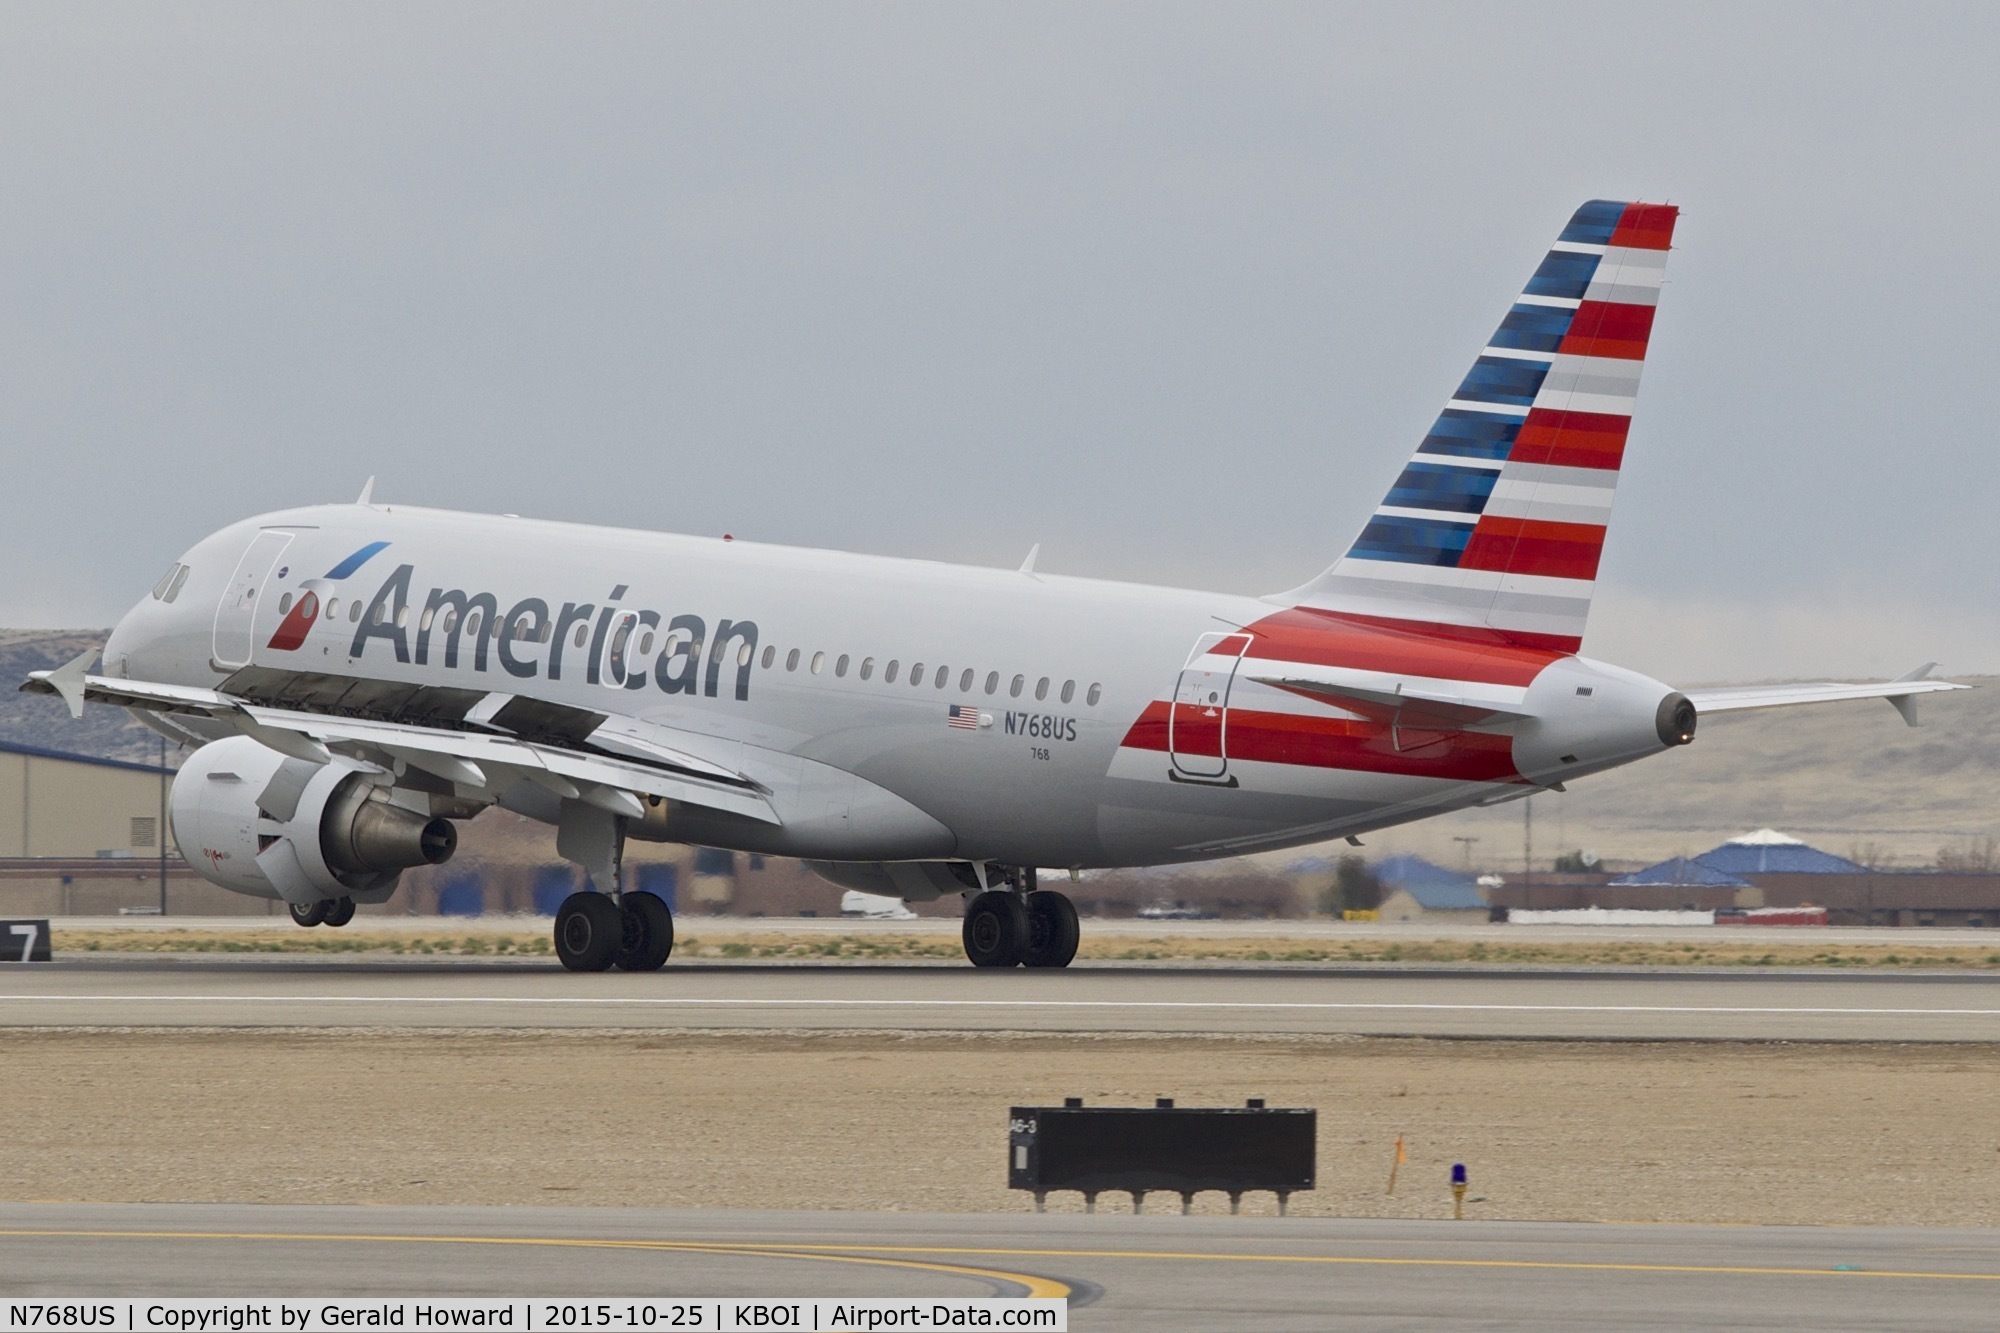 N768US, 2000 Airbus A319-112 C/N 1389, Landing roll out on RWY 10L.